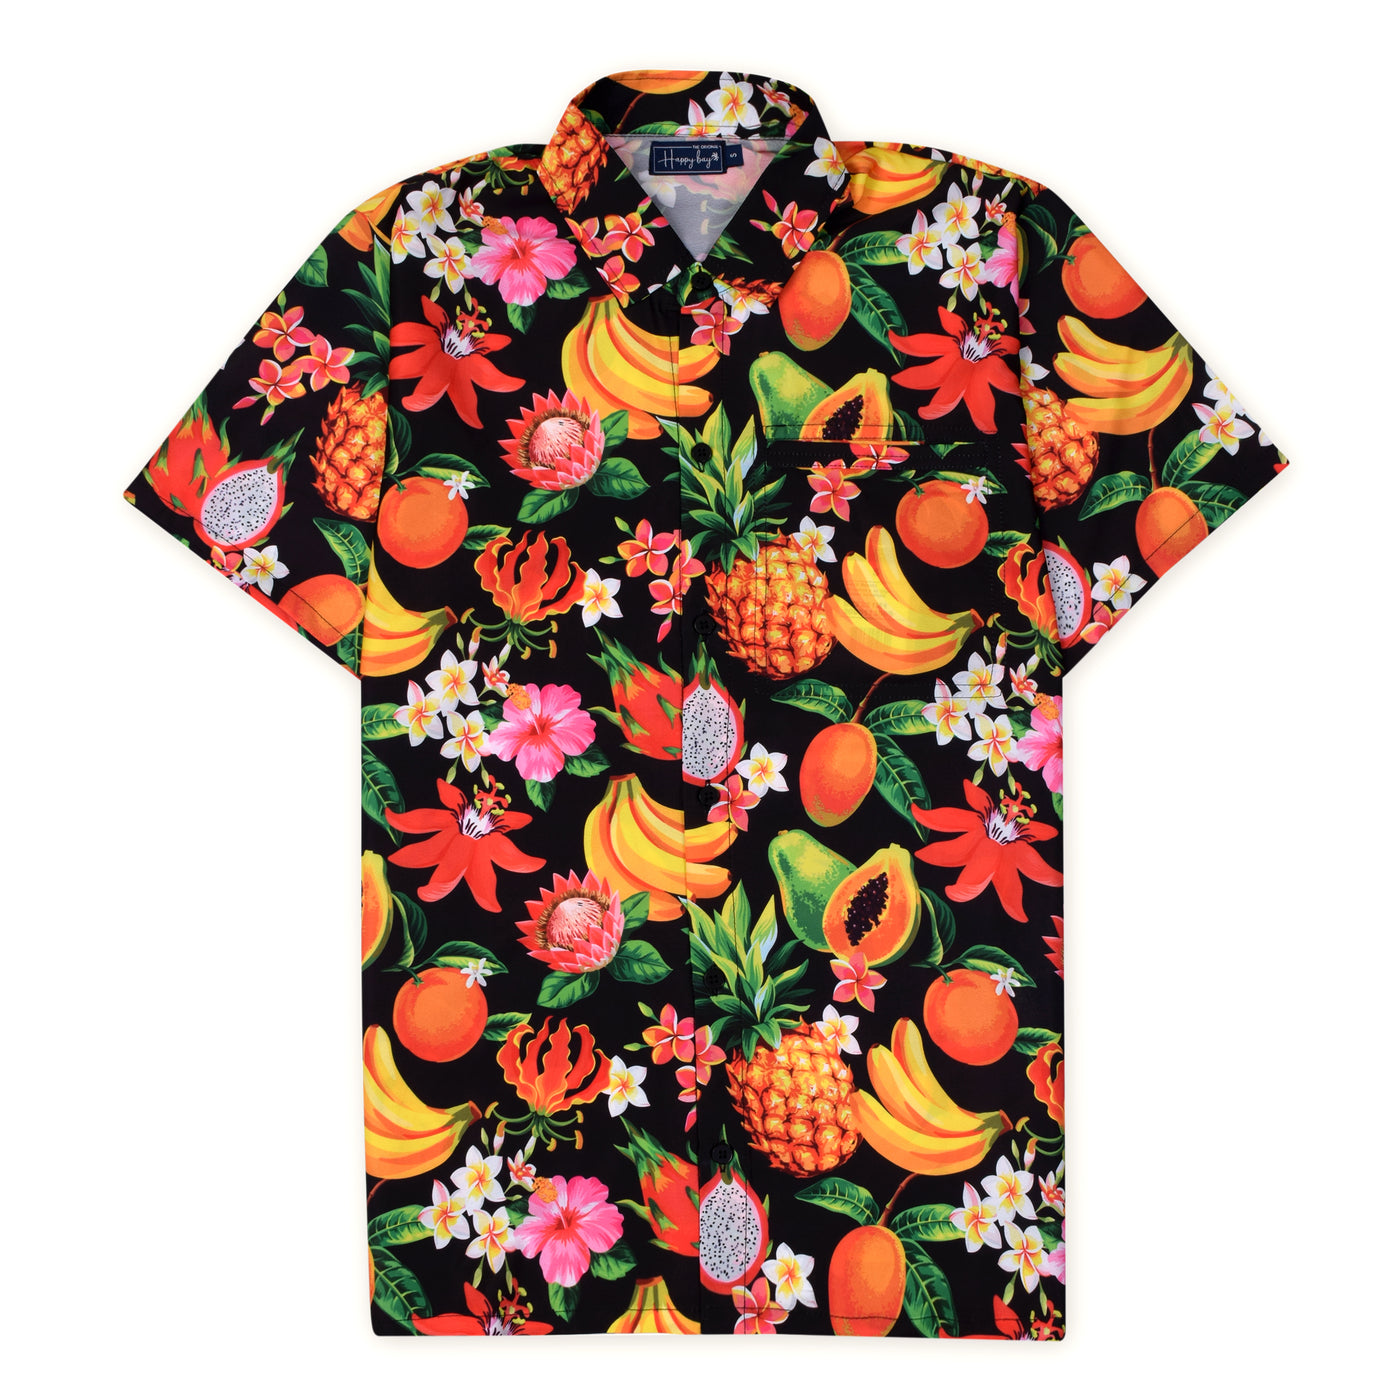 Buy now don't give a fig hawaiian shirt